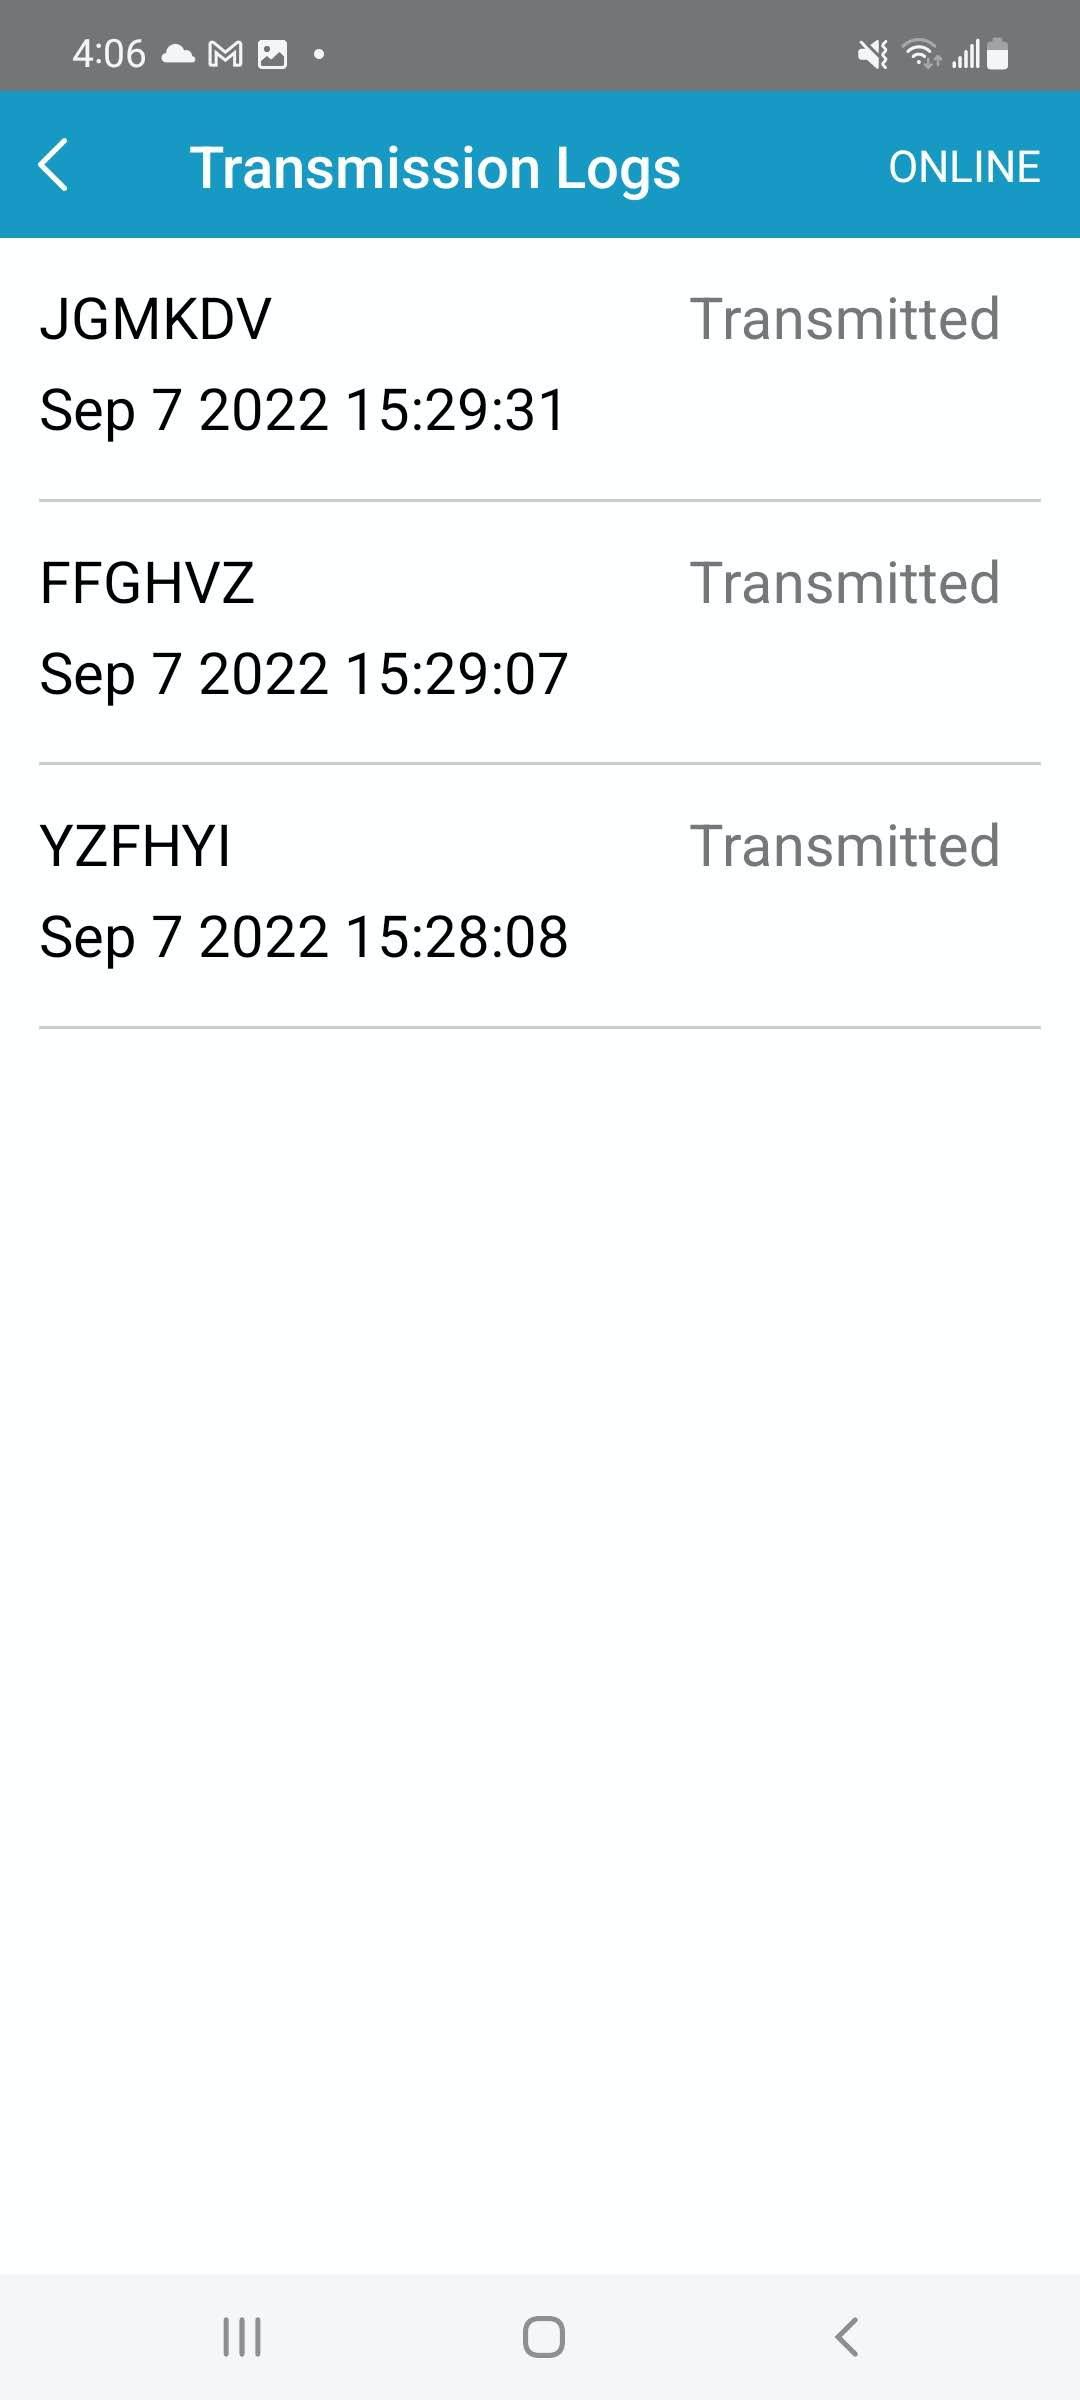 Here’s how your transmission logs will look on mobile